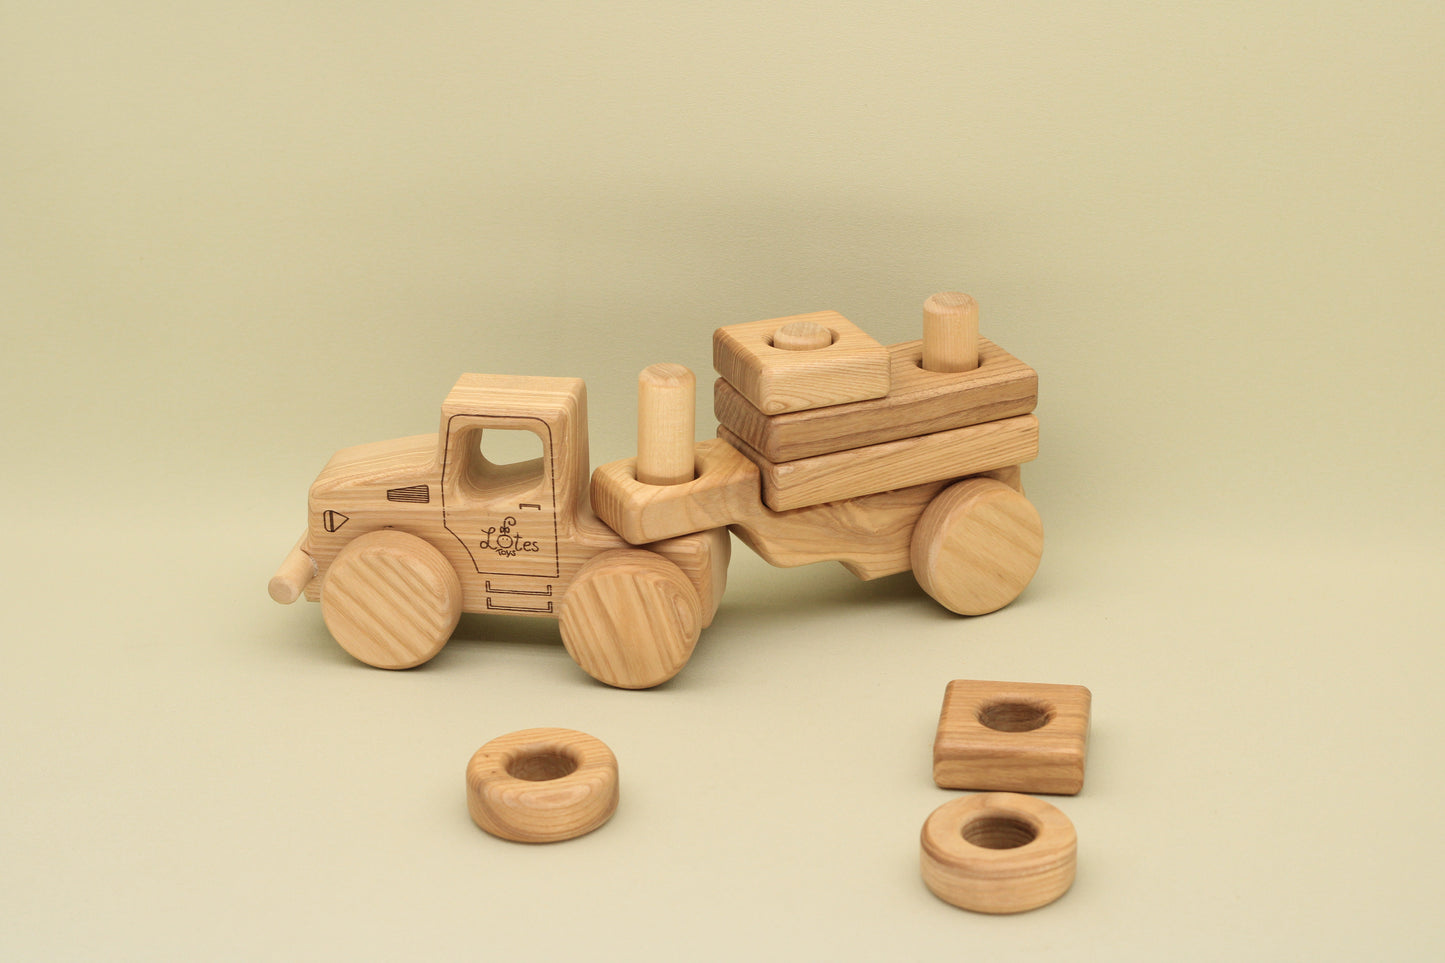 Lotes Toys Wooden Construction Vehicles Car BT52